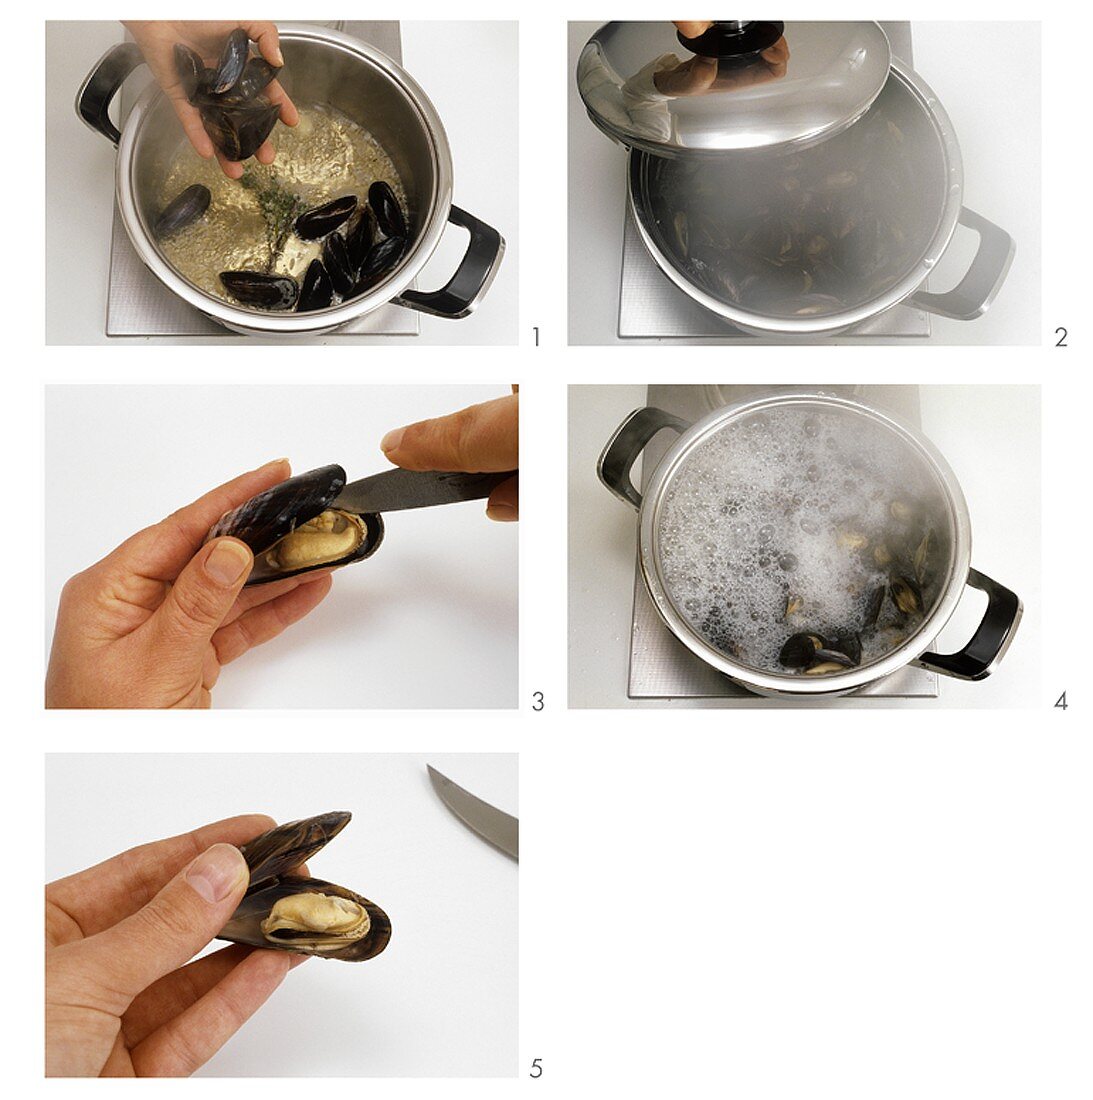 Cooking mussels in stock